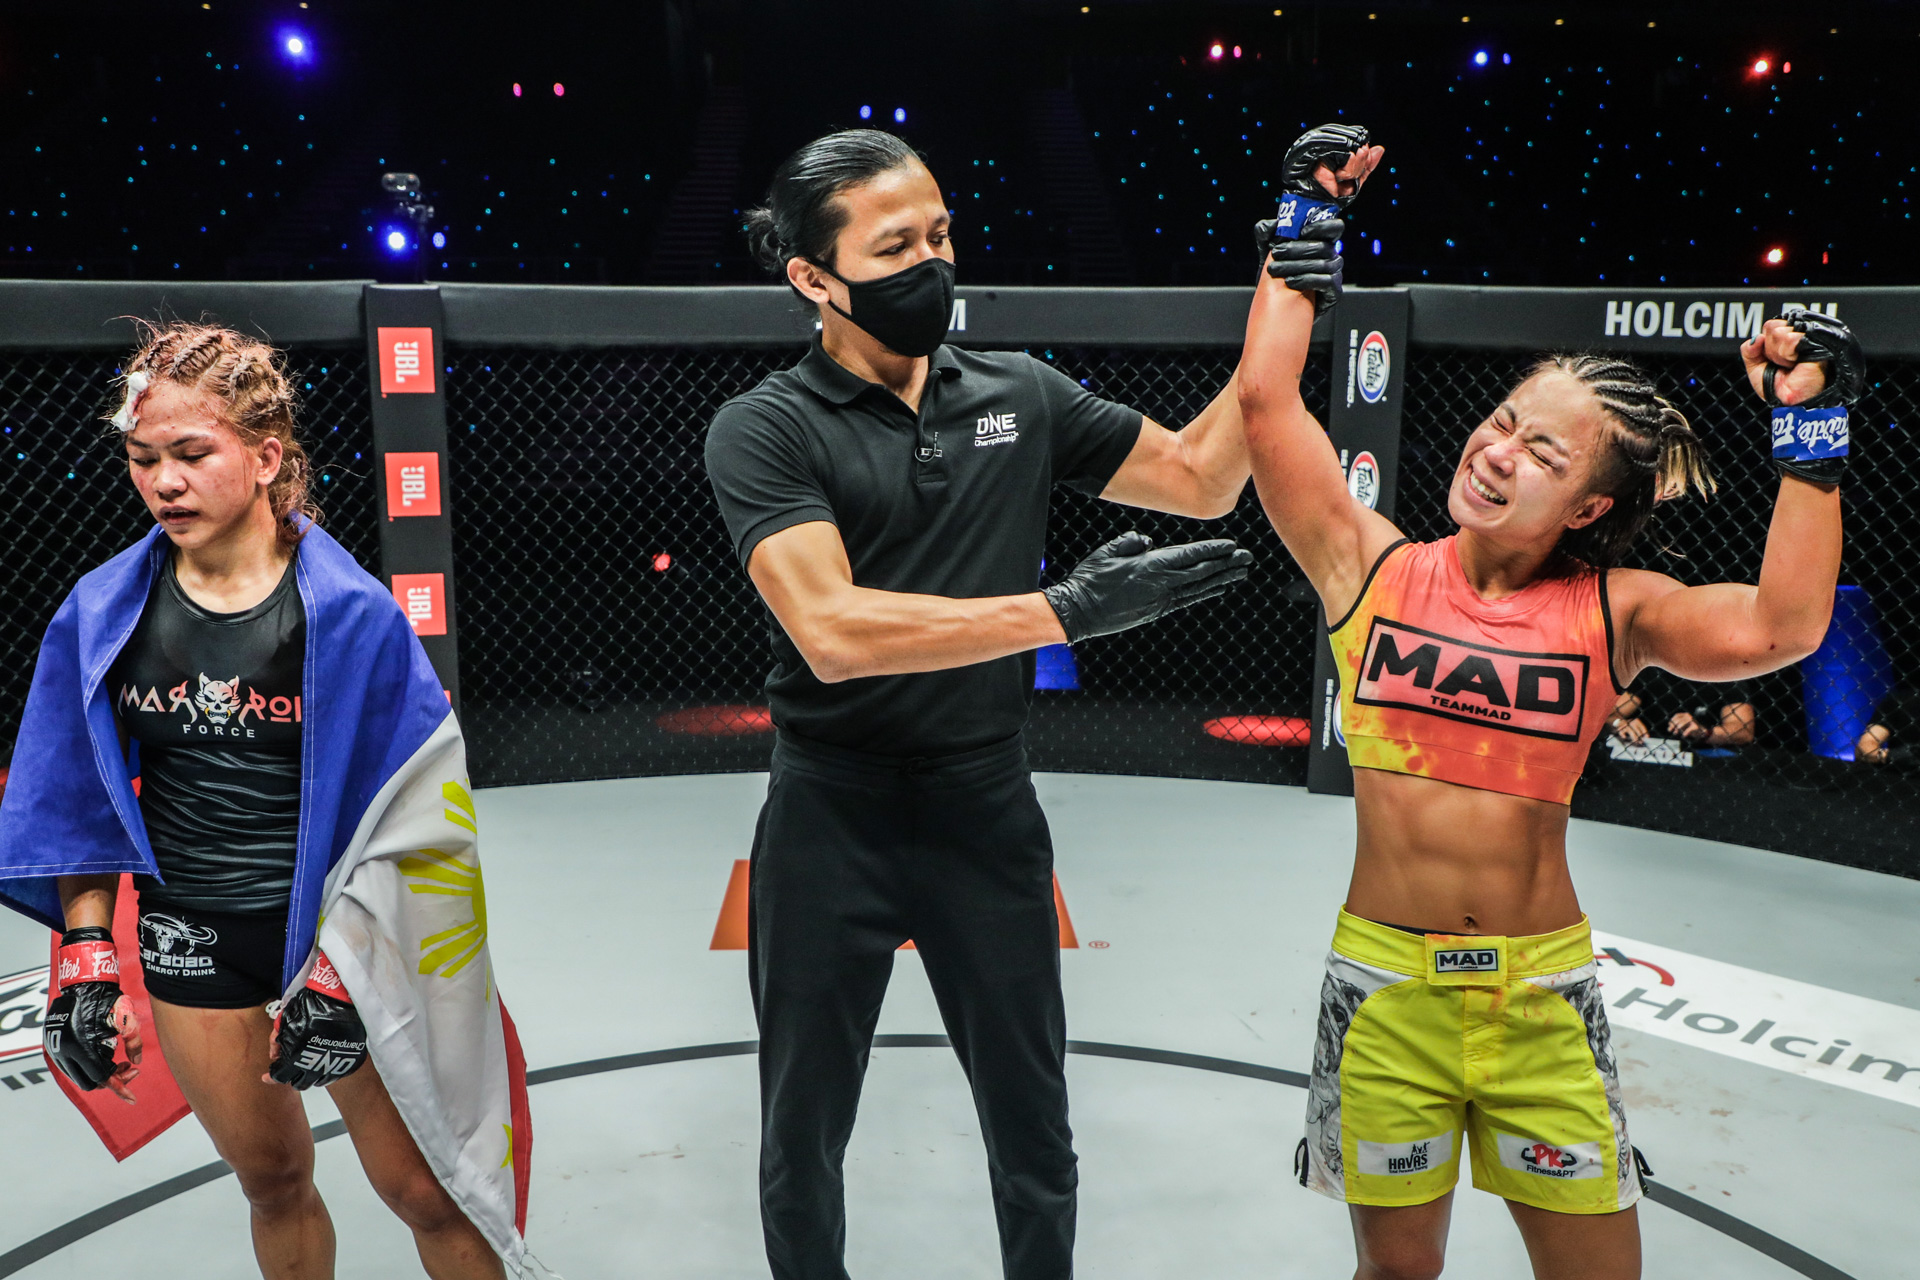 Denice Zamboanga (left) after the split decision victory for Ham Seo-Hee was announced in the ONE Atomweight Grand Prix.